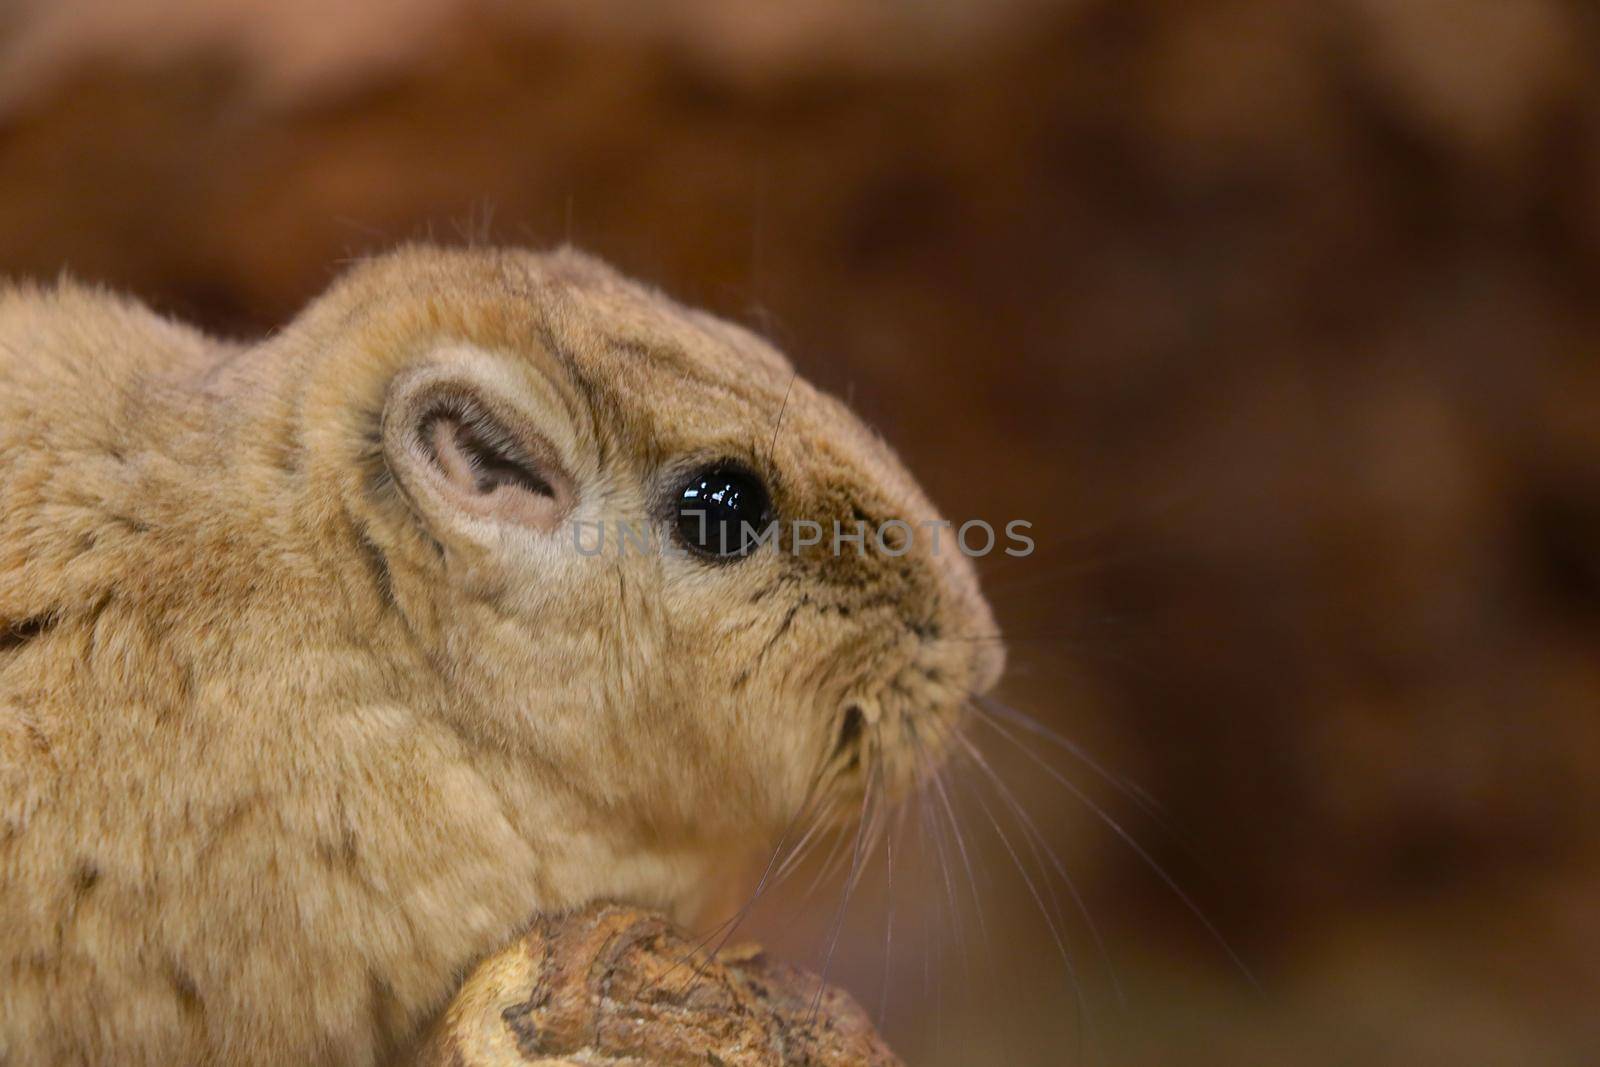 Gundi is a genus of rodents in the comb-toed family